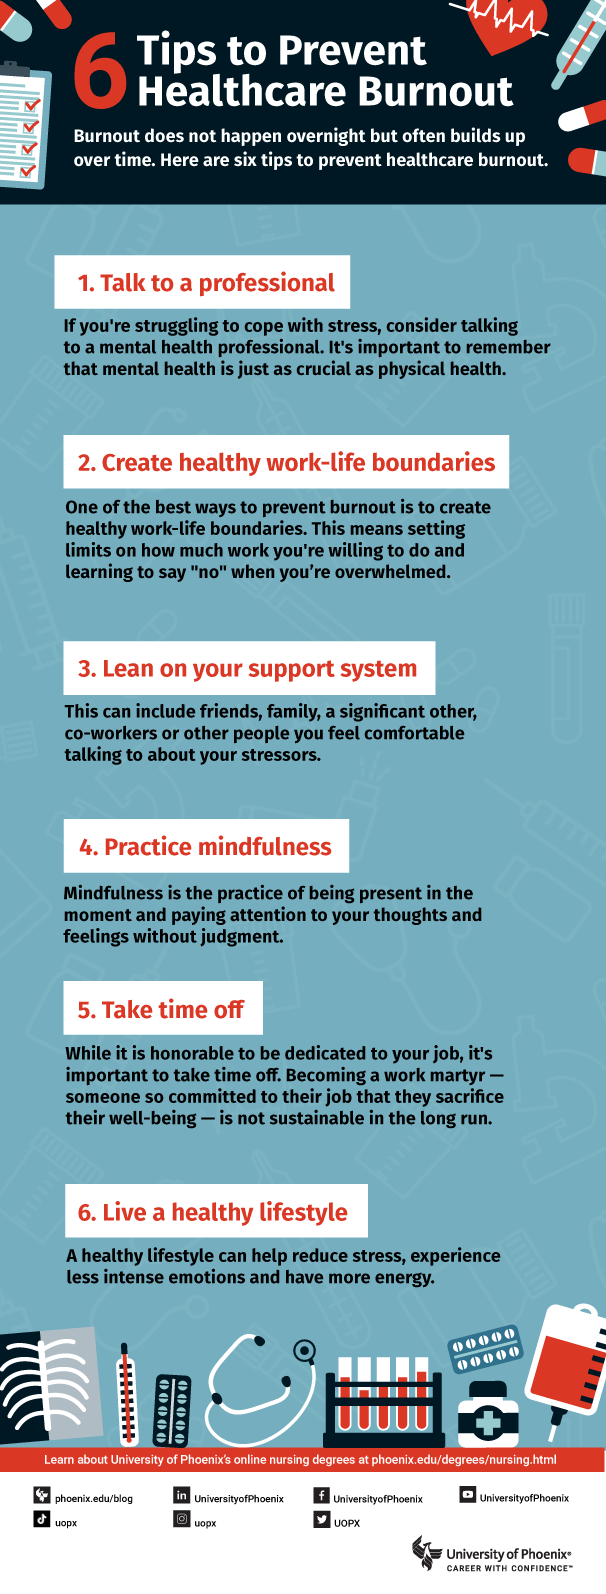 6 tips to prevent healthcare burnout infographic